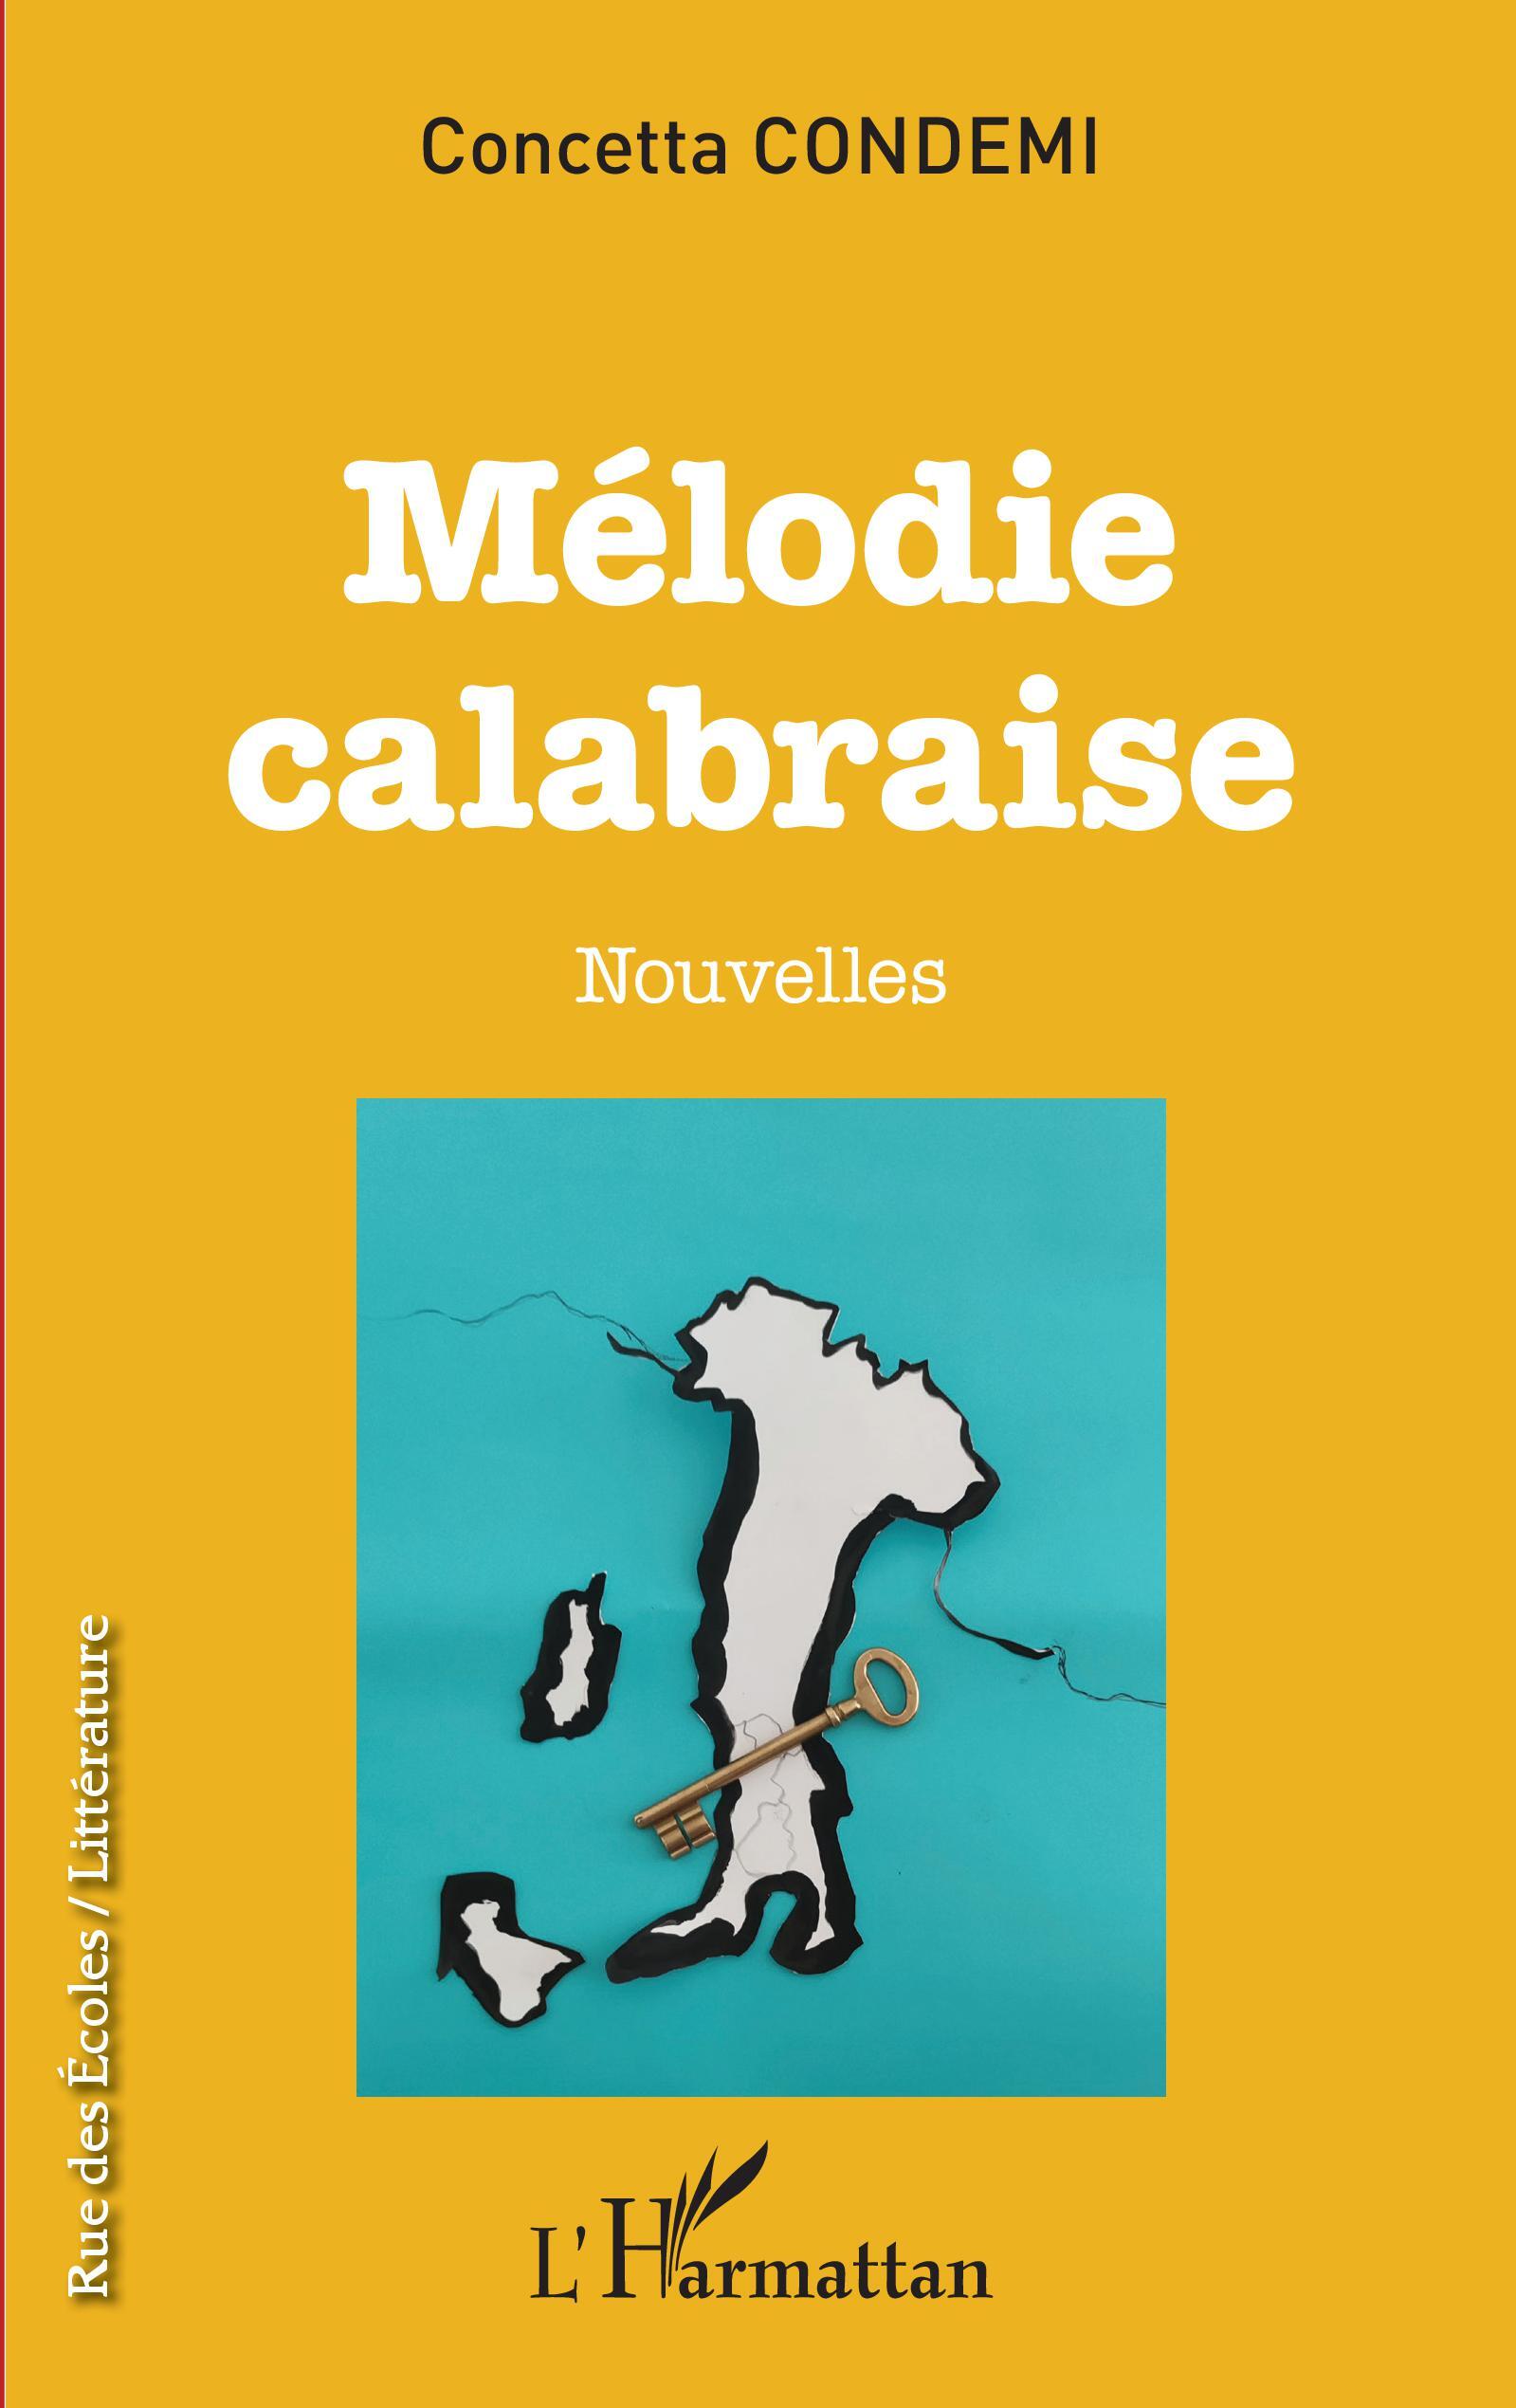 Mélodie calabraise (9782140266942-front-cover)